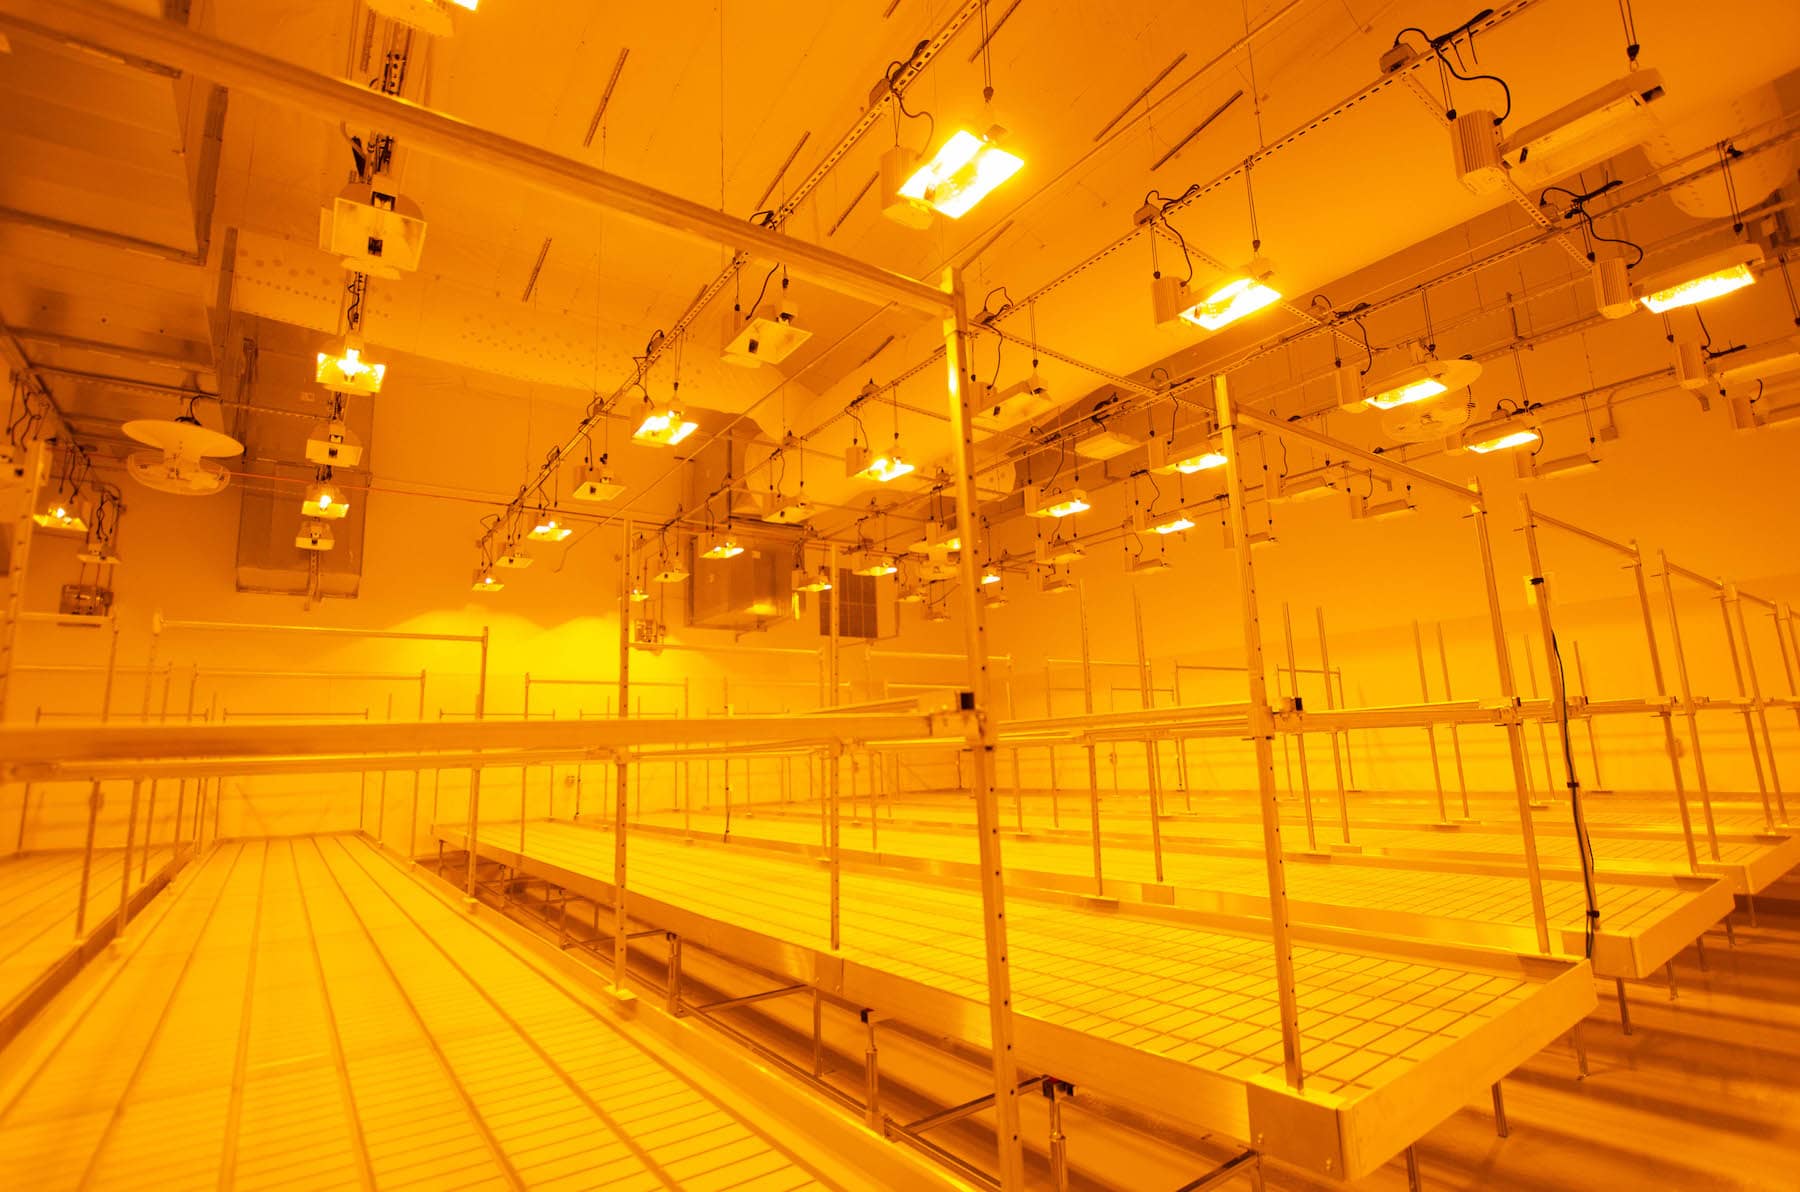 Reduce Light Spillage with Efficient Facility Design